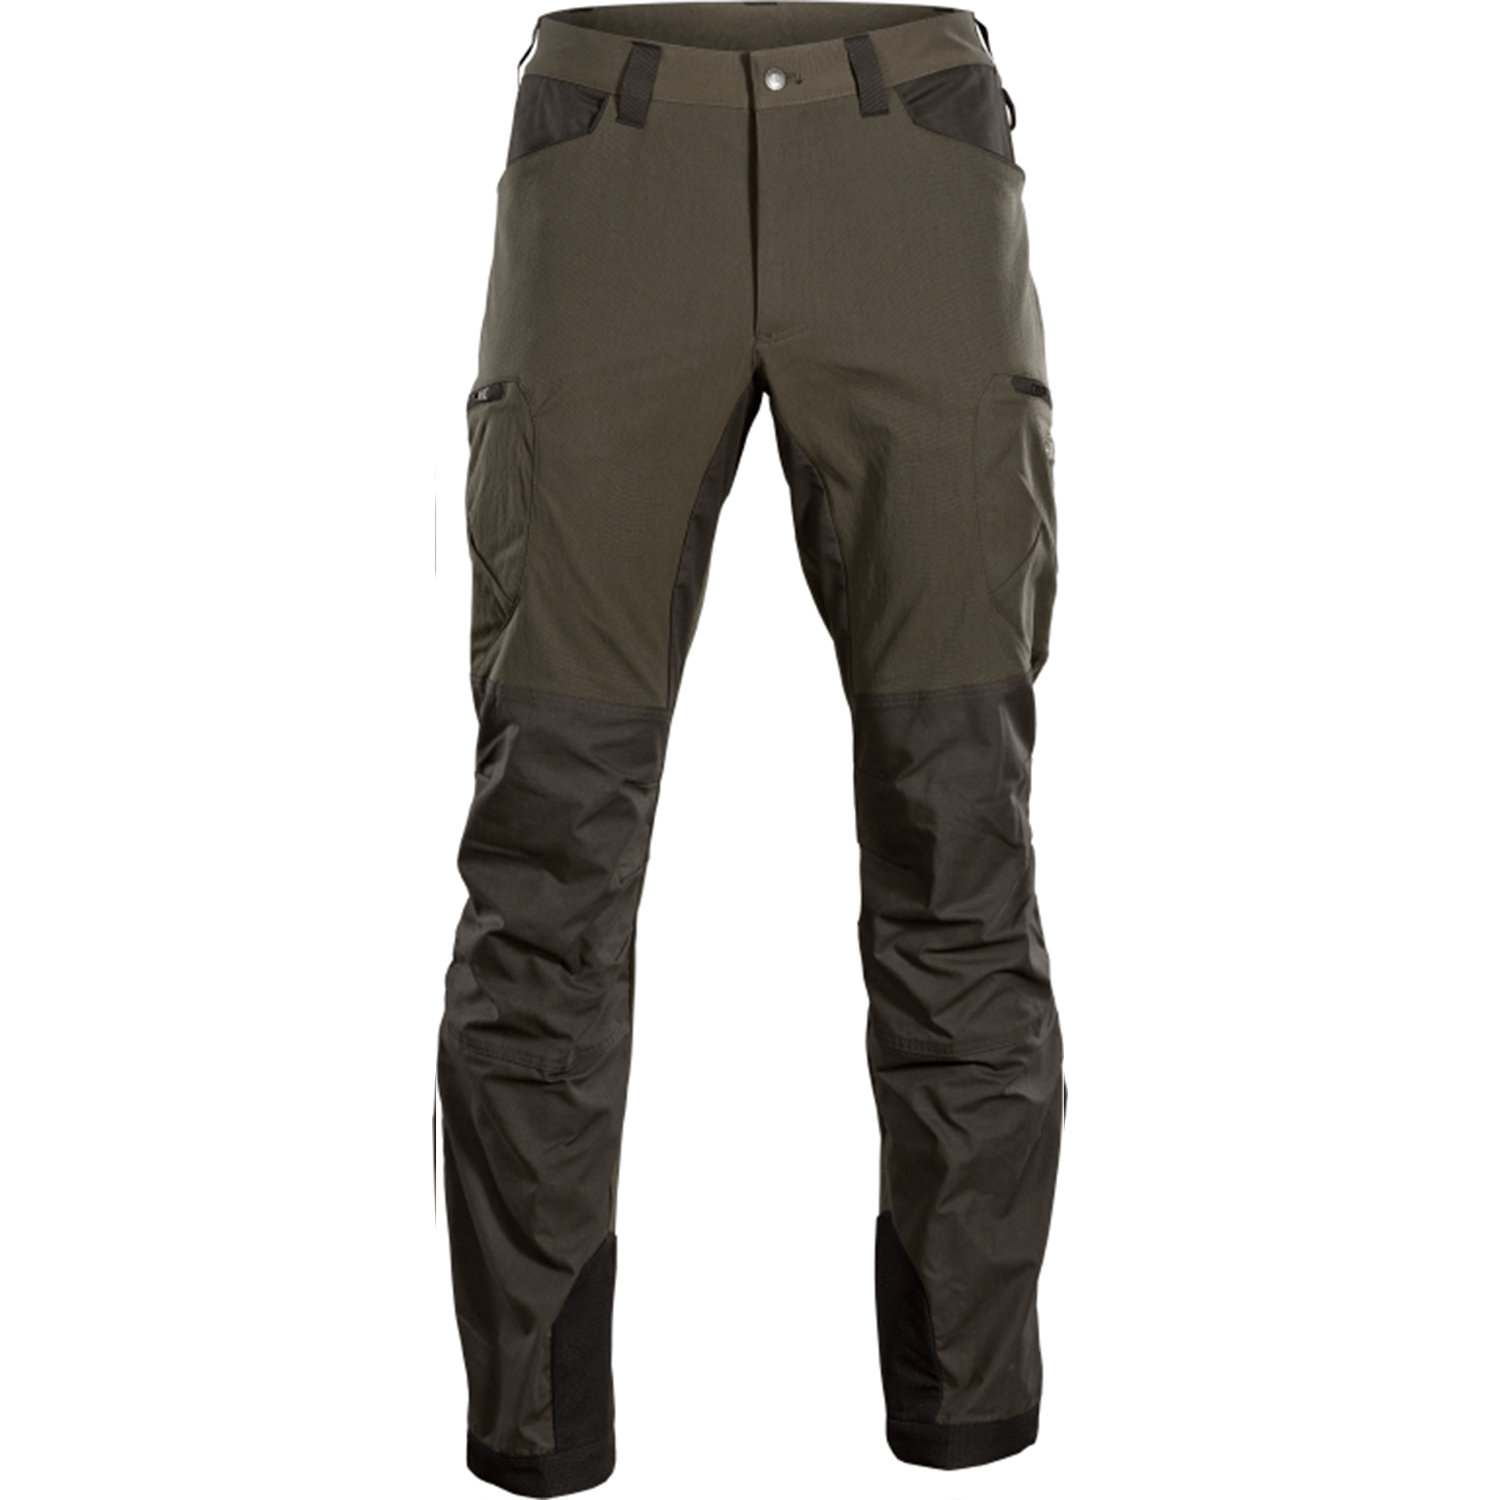 Härkila Ragnar Trousers (Willow Green/Shadow Grey) - Hunting Trousers